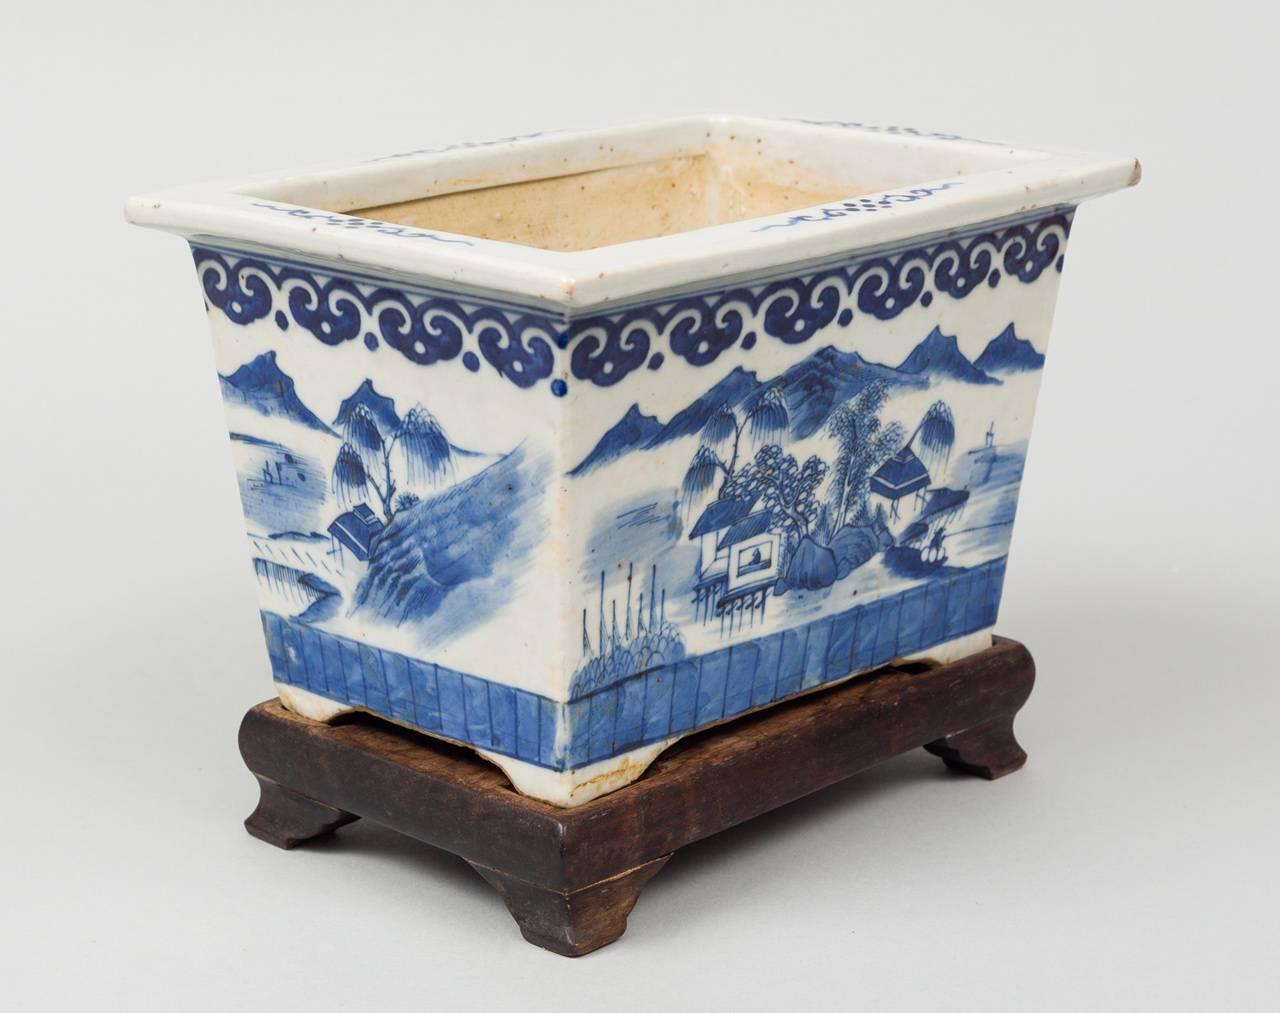 Chinese export porcelain rectangular blue and white jardiniere on wooden stand. It is decorated at the top with a ruyi head border and the body with exotic houses, mountains, trees and figures and set on small bracket feet.